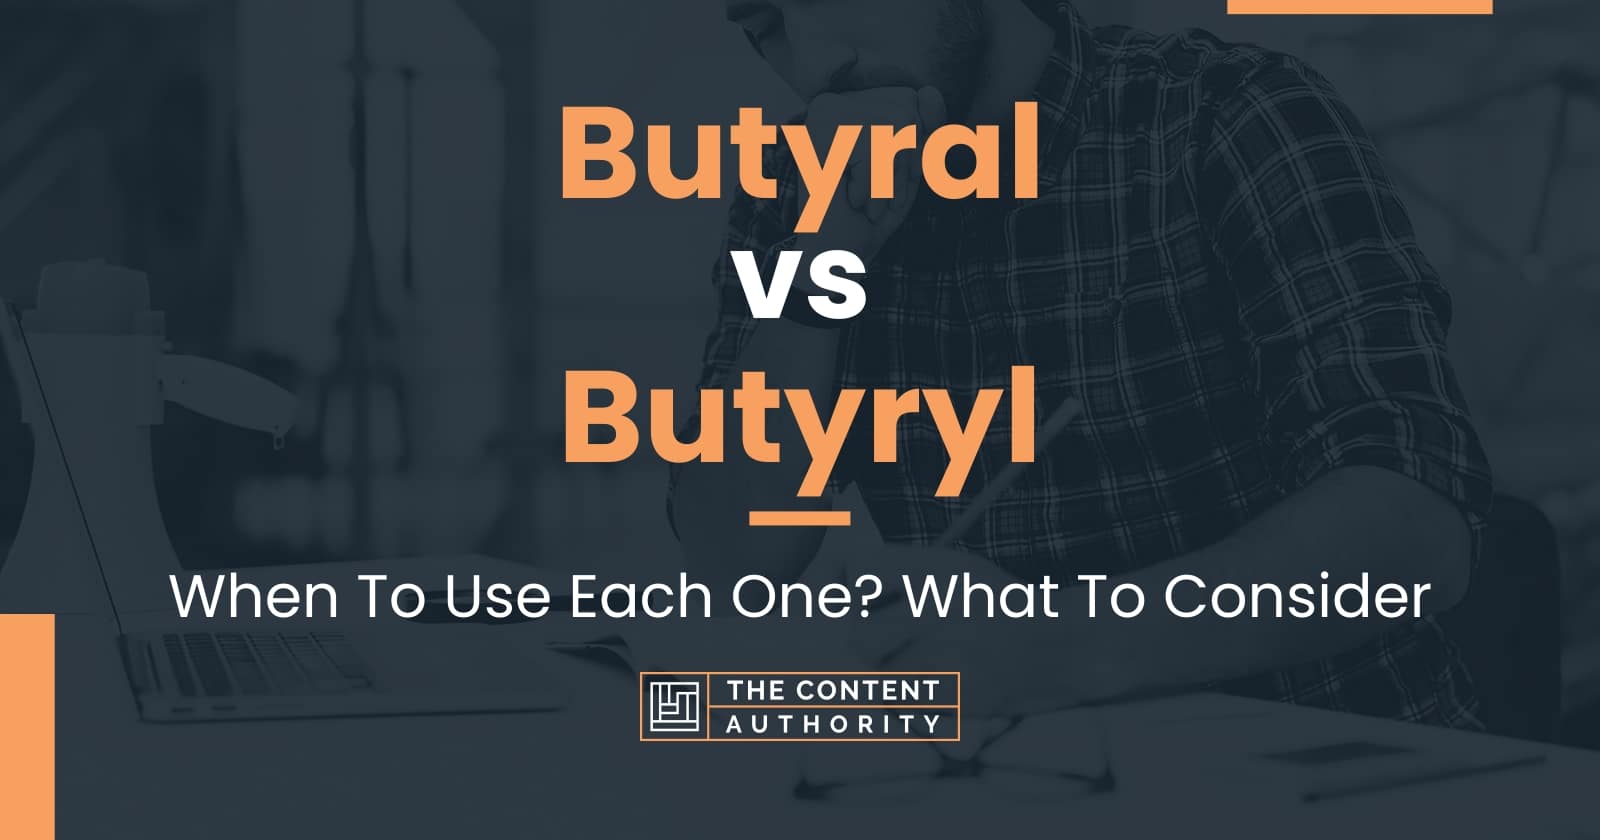 Butyral vs Butyryl: When To Use Each One? What To Consider